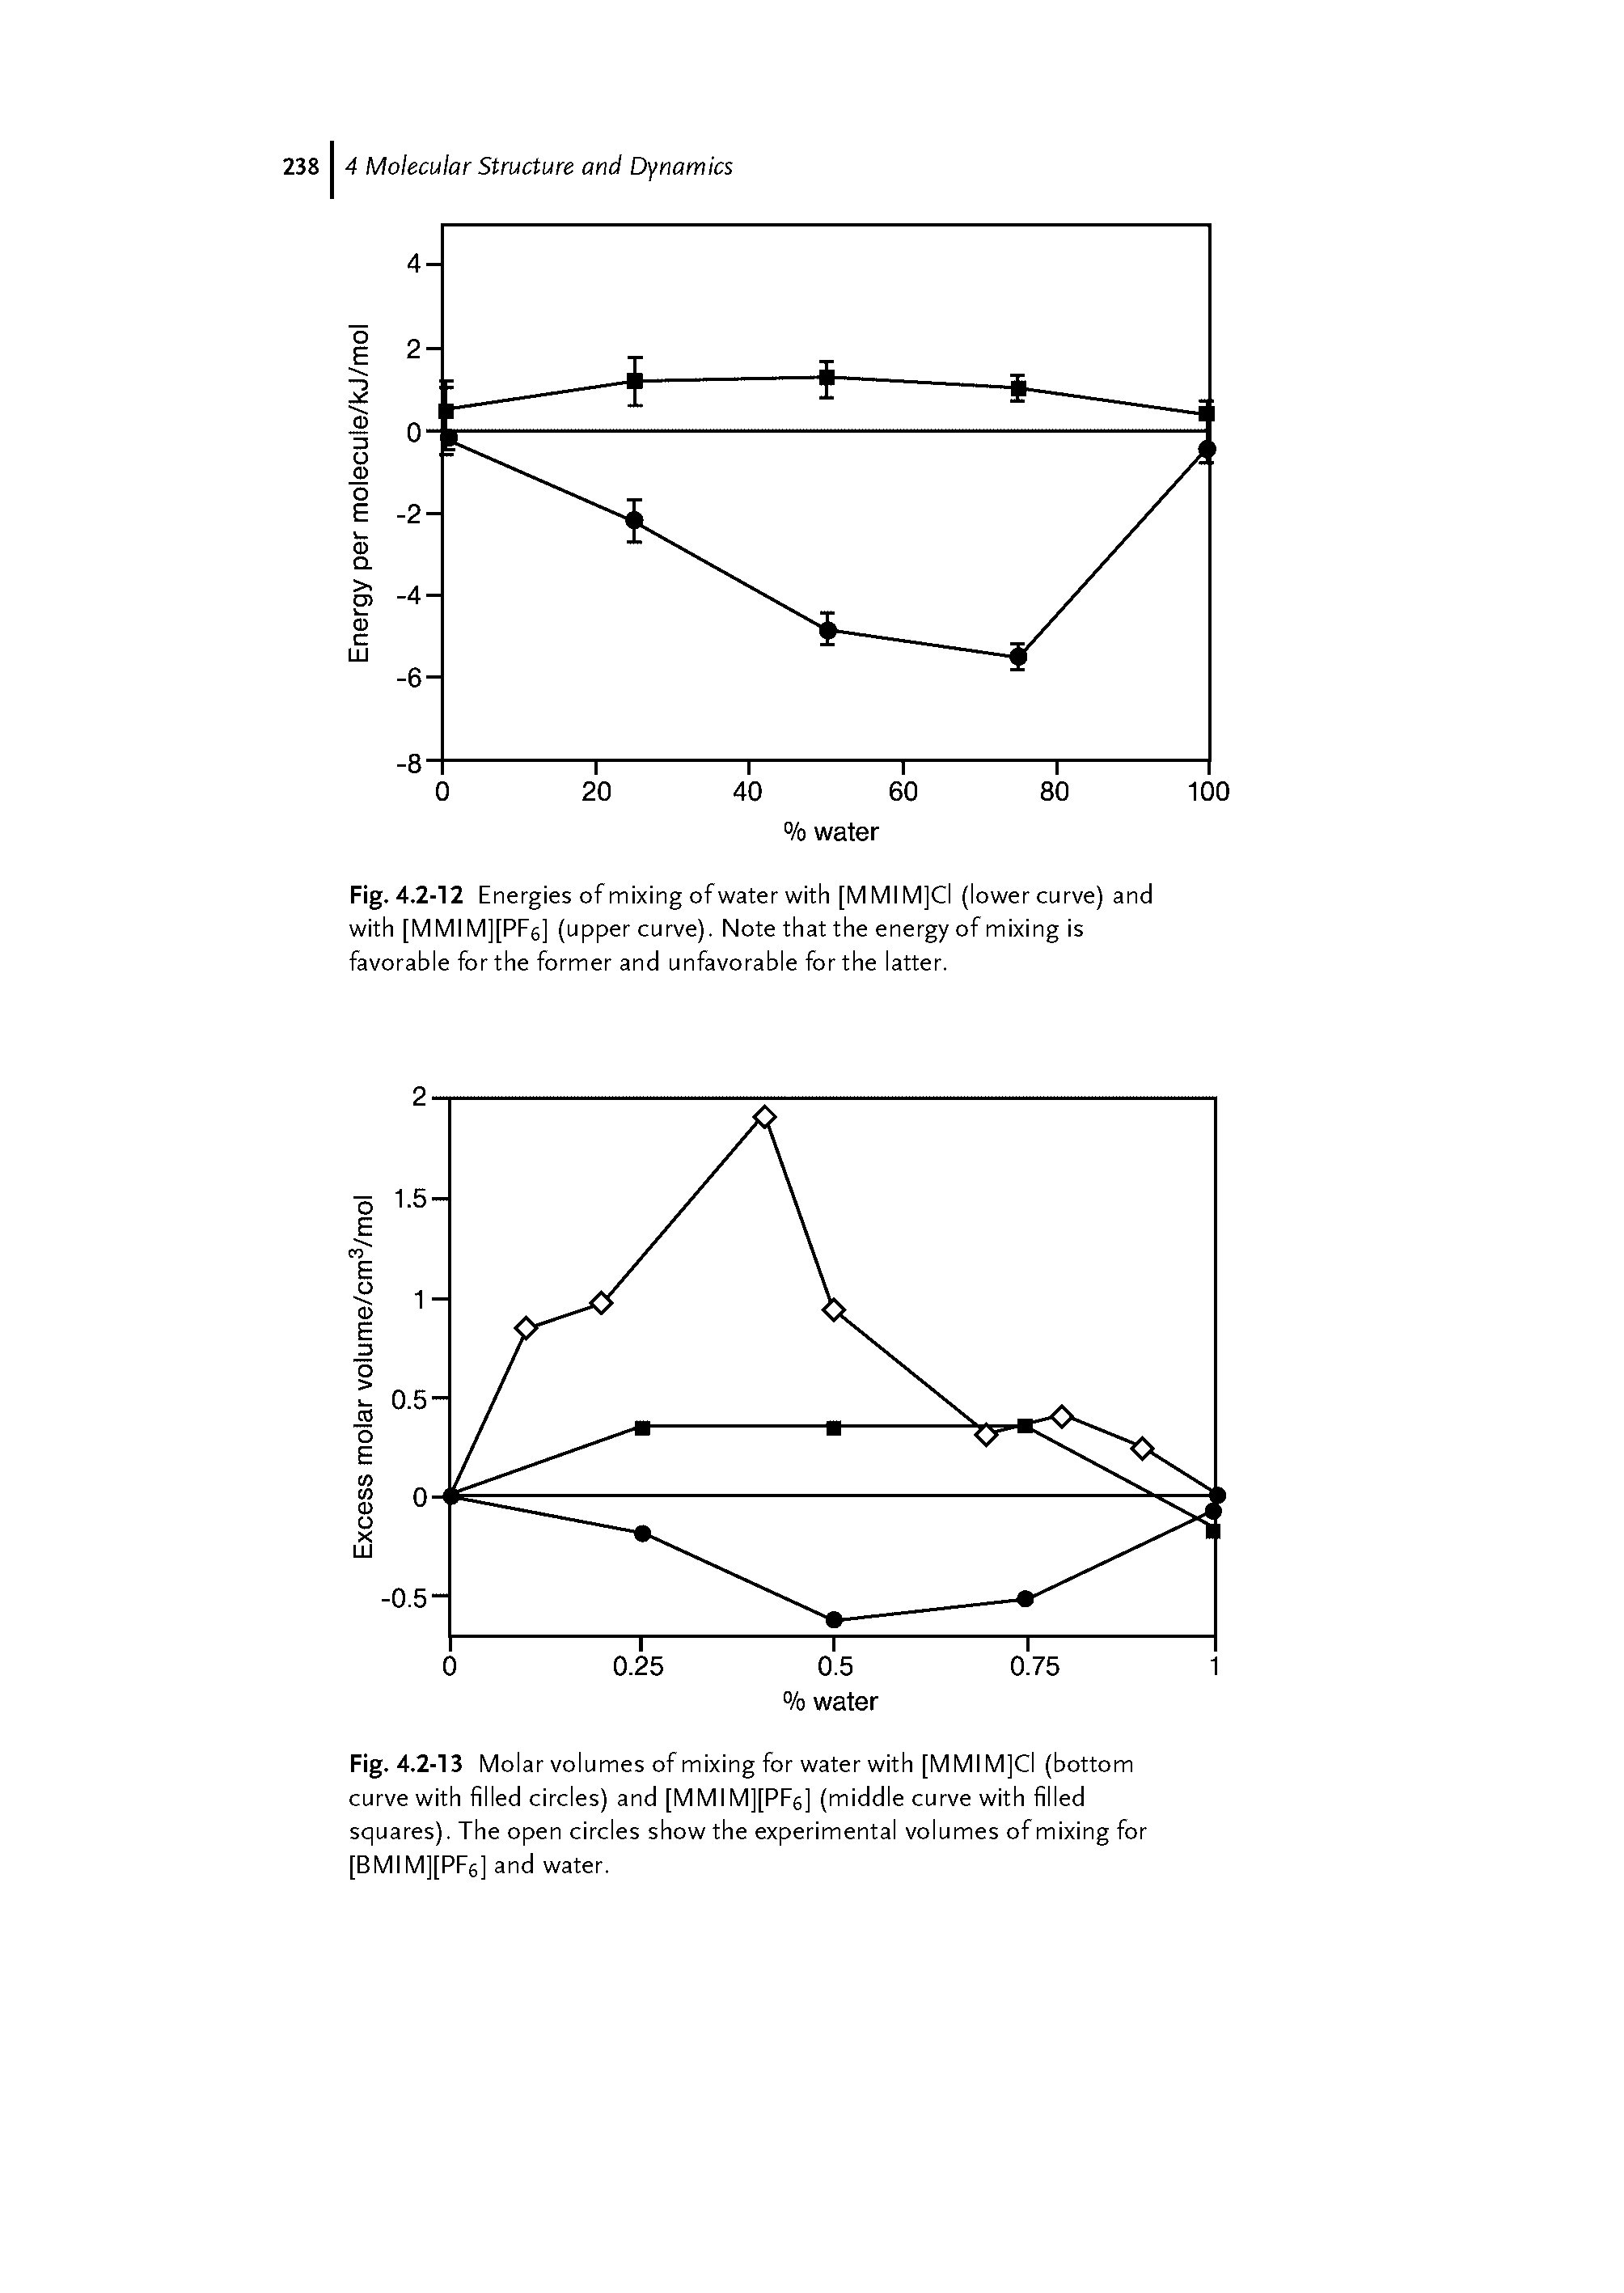 Fig. 4.2-13 Molar volumes of mixing for water with [MMI M]Cl (bottom curve with filled circles) and [MMIM][PFe] (middle curve with filled squares). The open circles show the experimental volumes of mixing for [BMIM][PF6] and water.